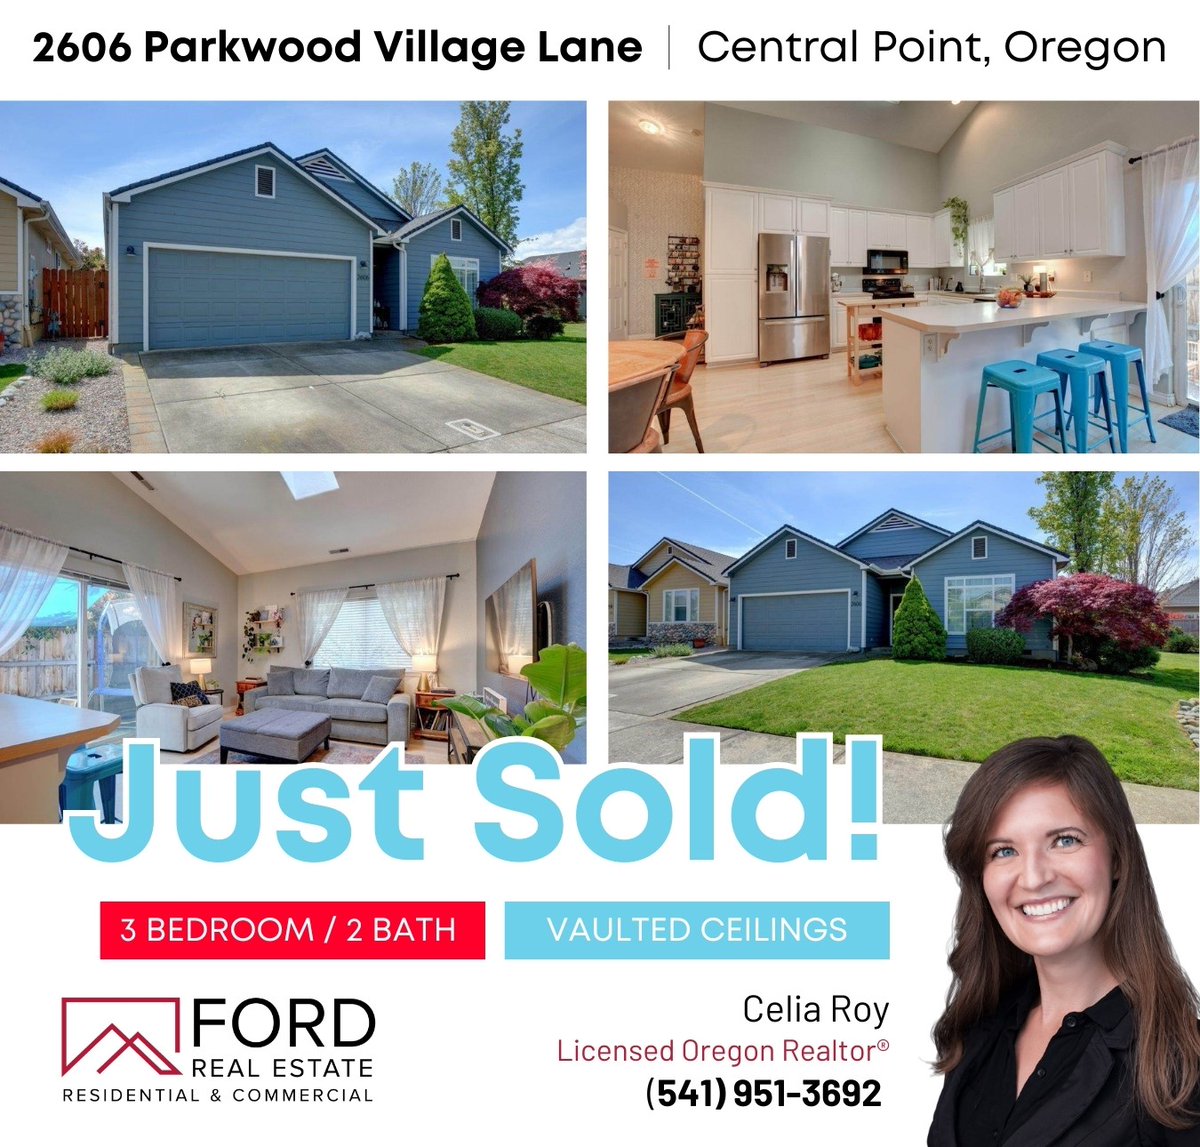 2606 Parkwood Village Ln, Central Pt, OR is now off the market! Congrats to Celia Roy, her buyers, and her sellers! #JustSold #CentralPoint #RogueValley